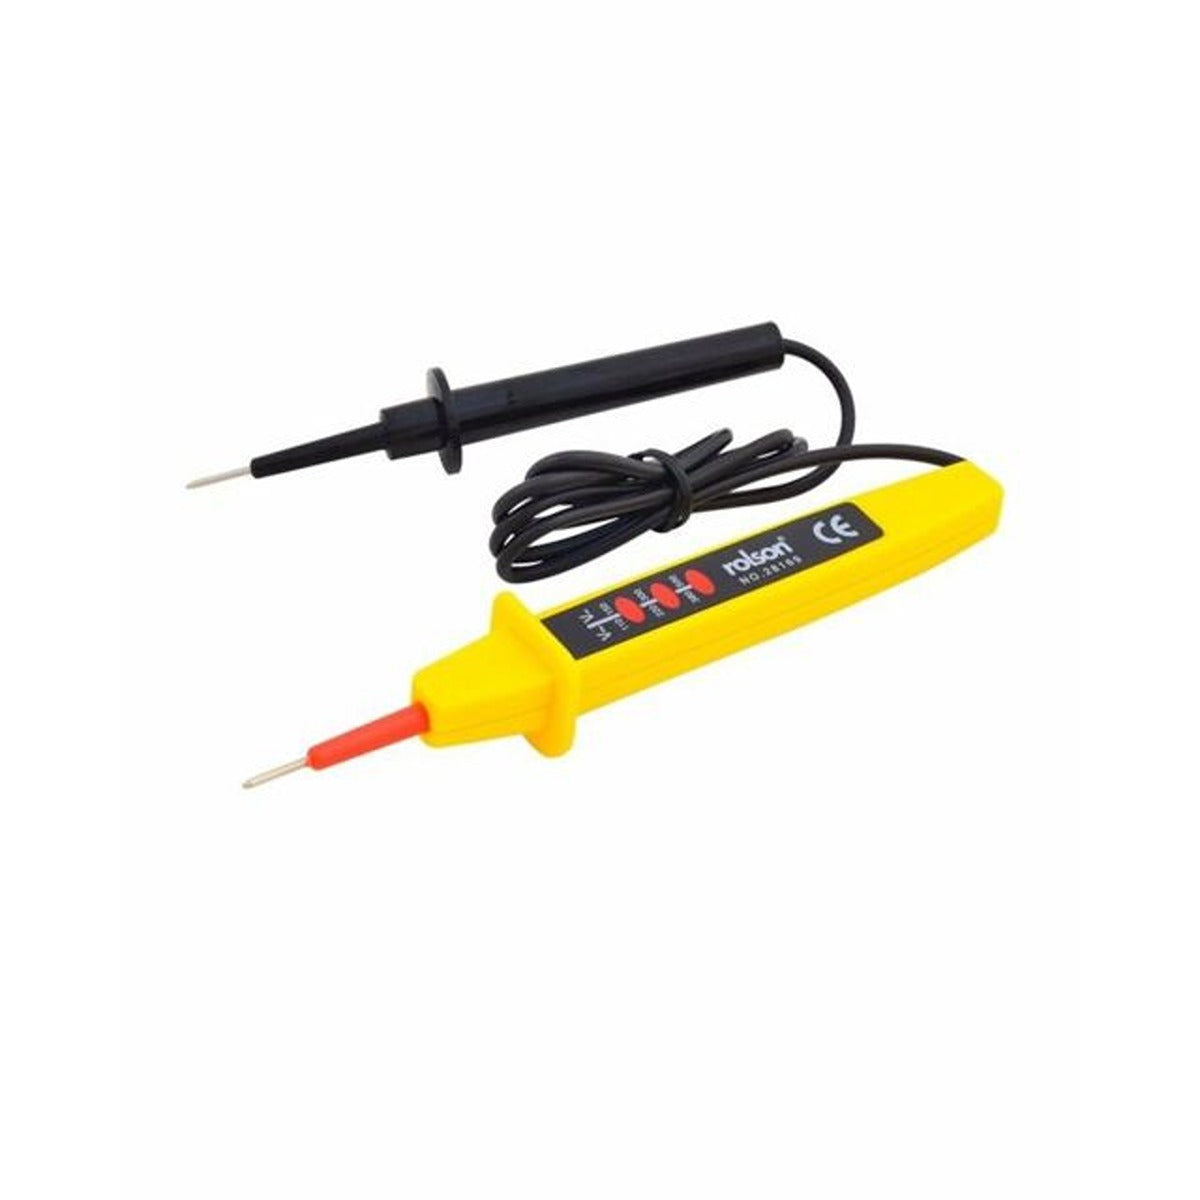 Rolson - 3 in 1 Mains Voltage Circuit Tester - Continental Food Store